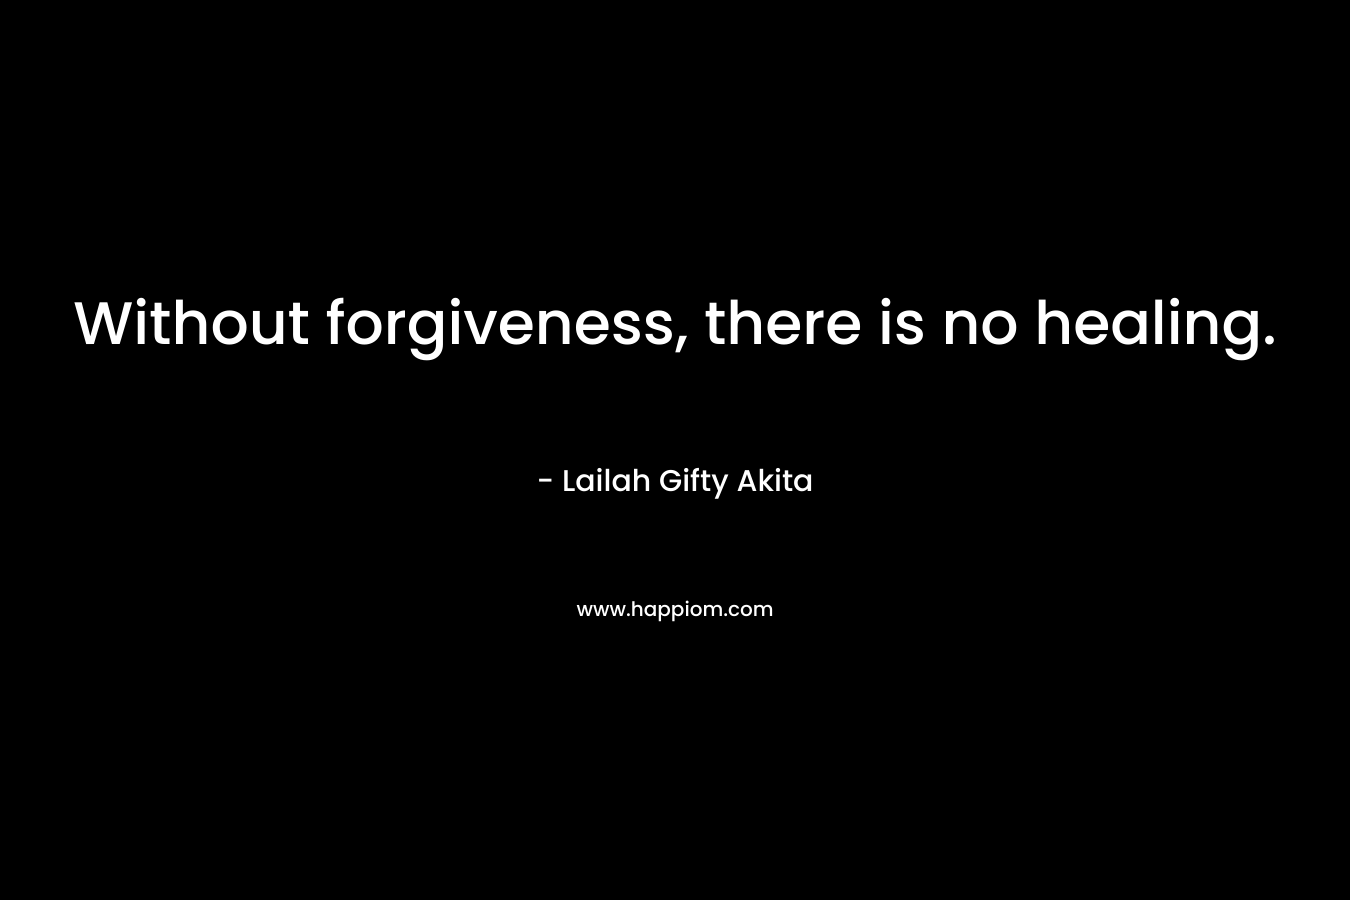 Without forgiveness, there is no healing.